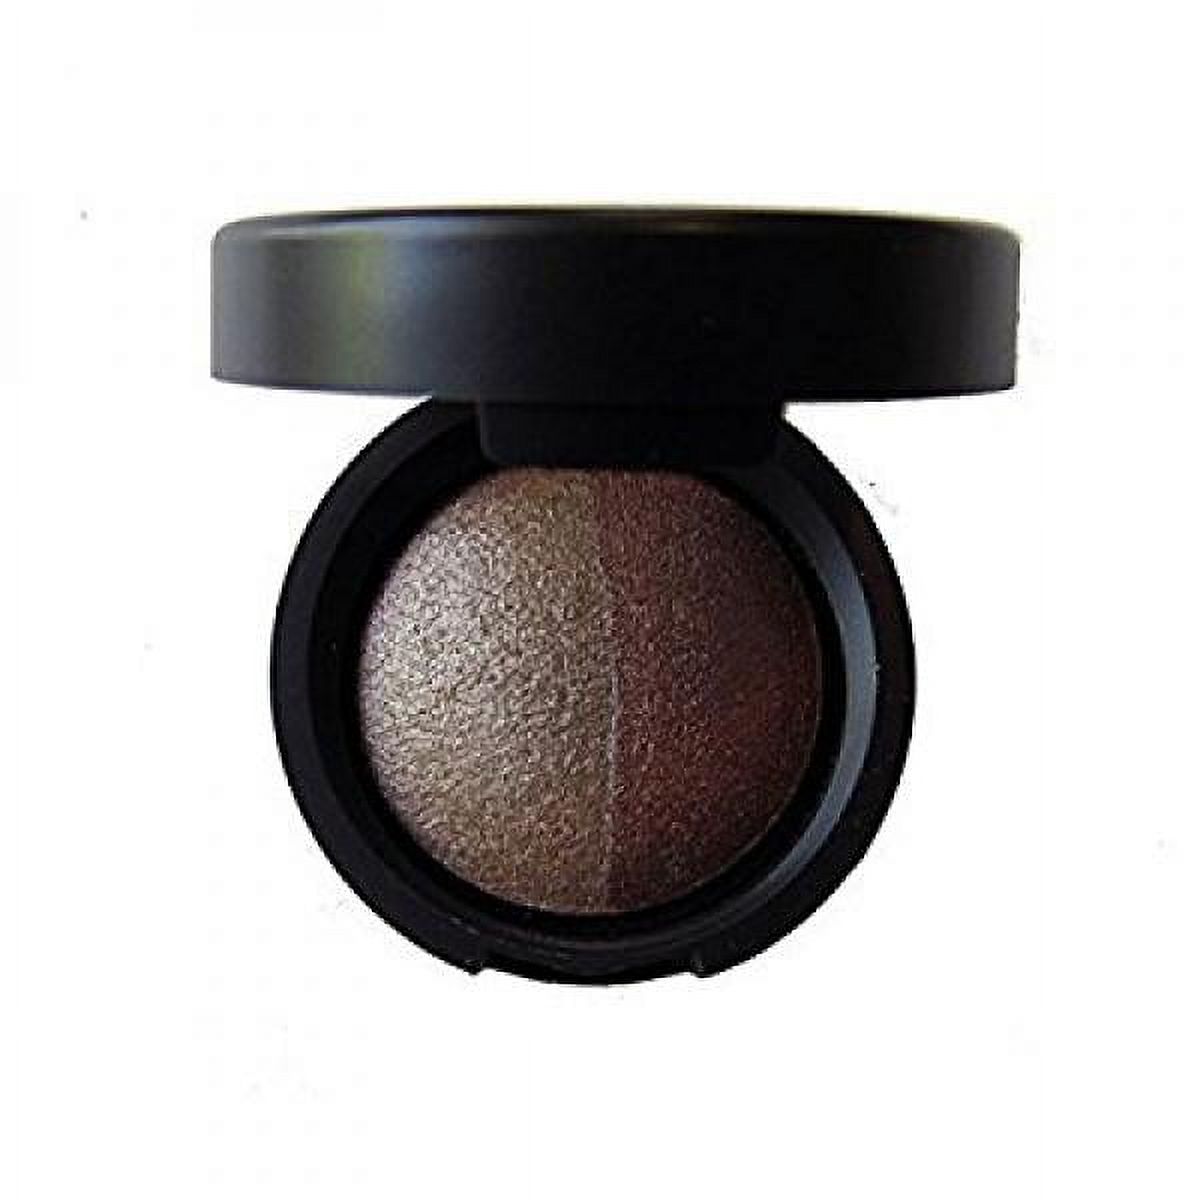 Laura Geller Baked Color Intense Shadow Duo Stone/Terracotta - image 1 of 1